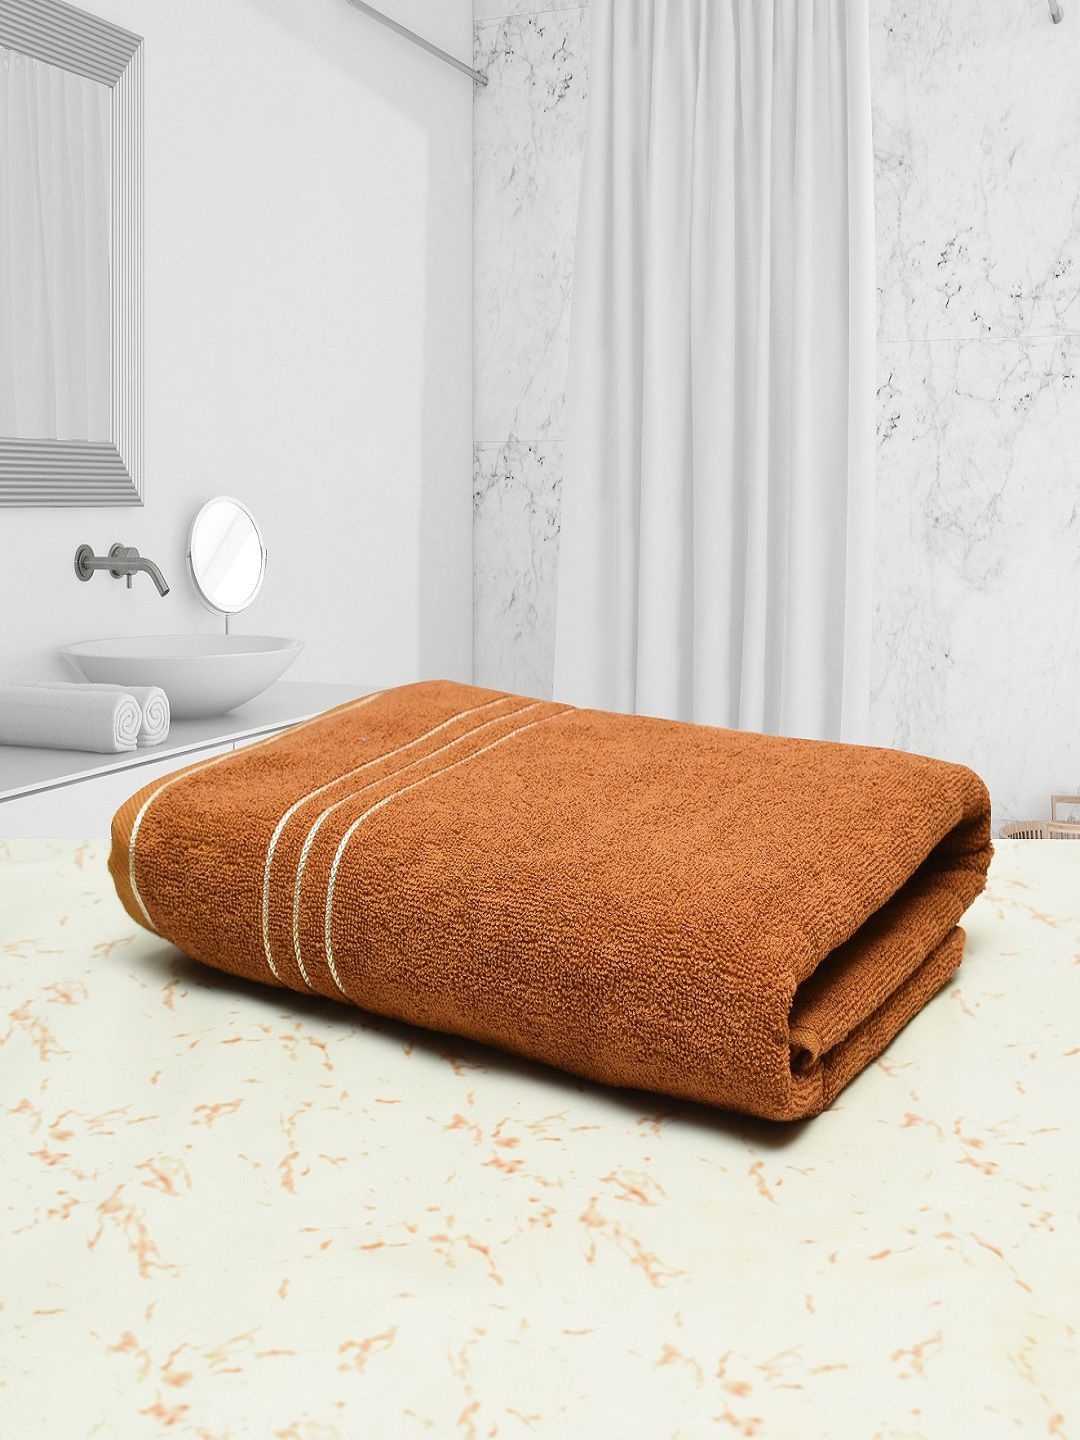 Cotton Bolls Textiles Brown Solid 400 GSM Cotton Bath Towels Price in India